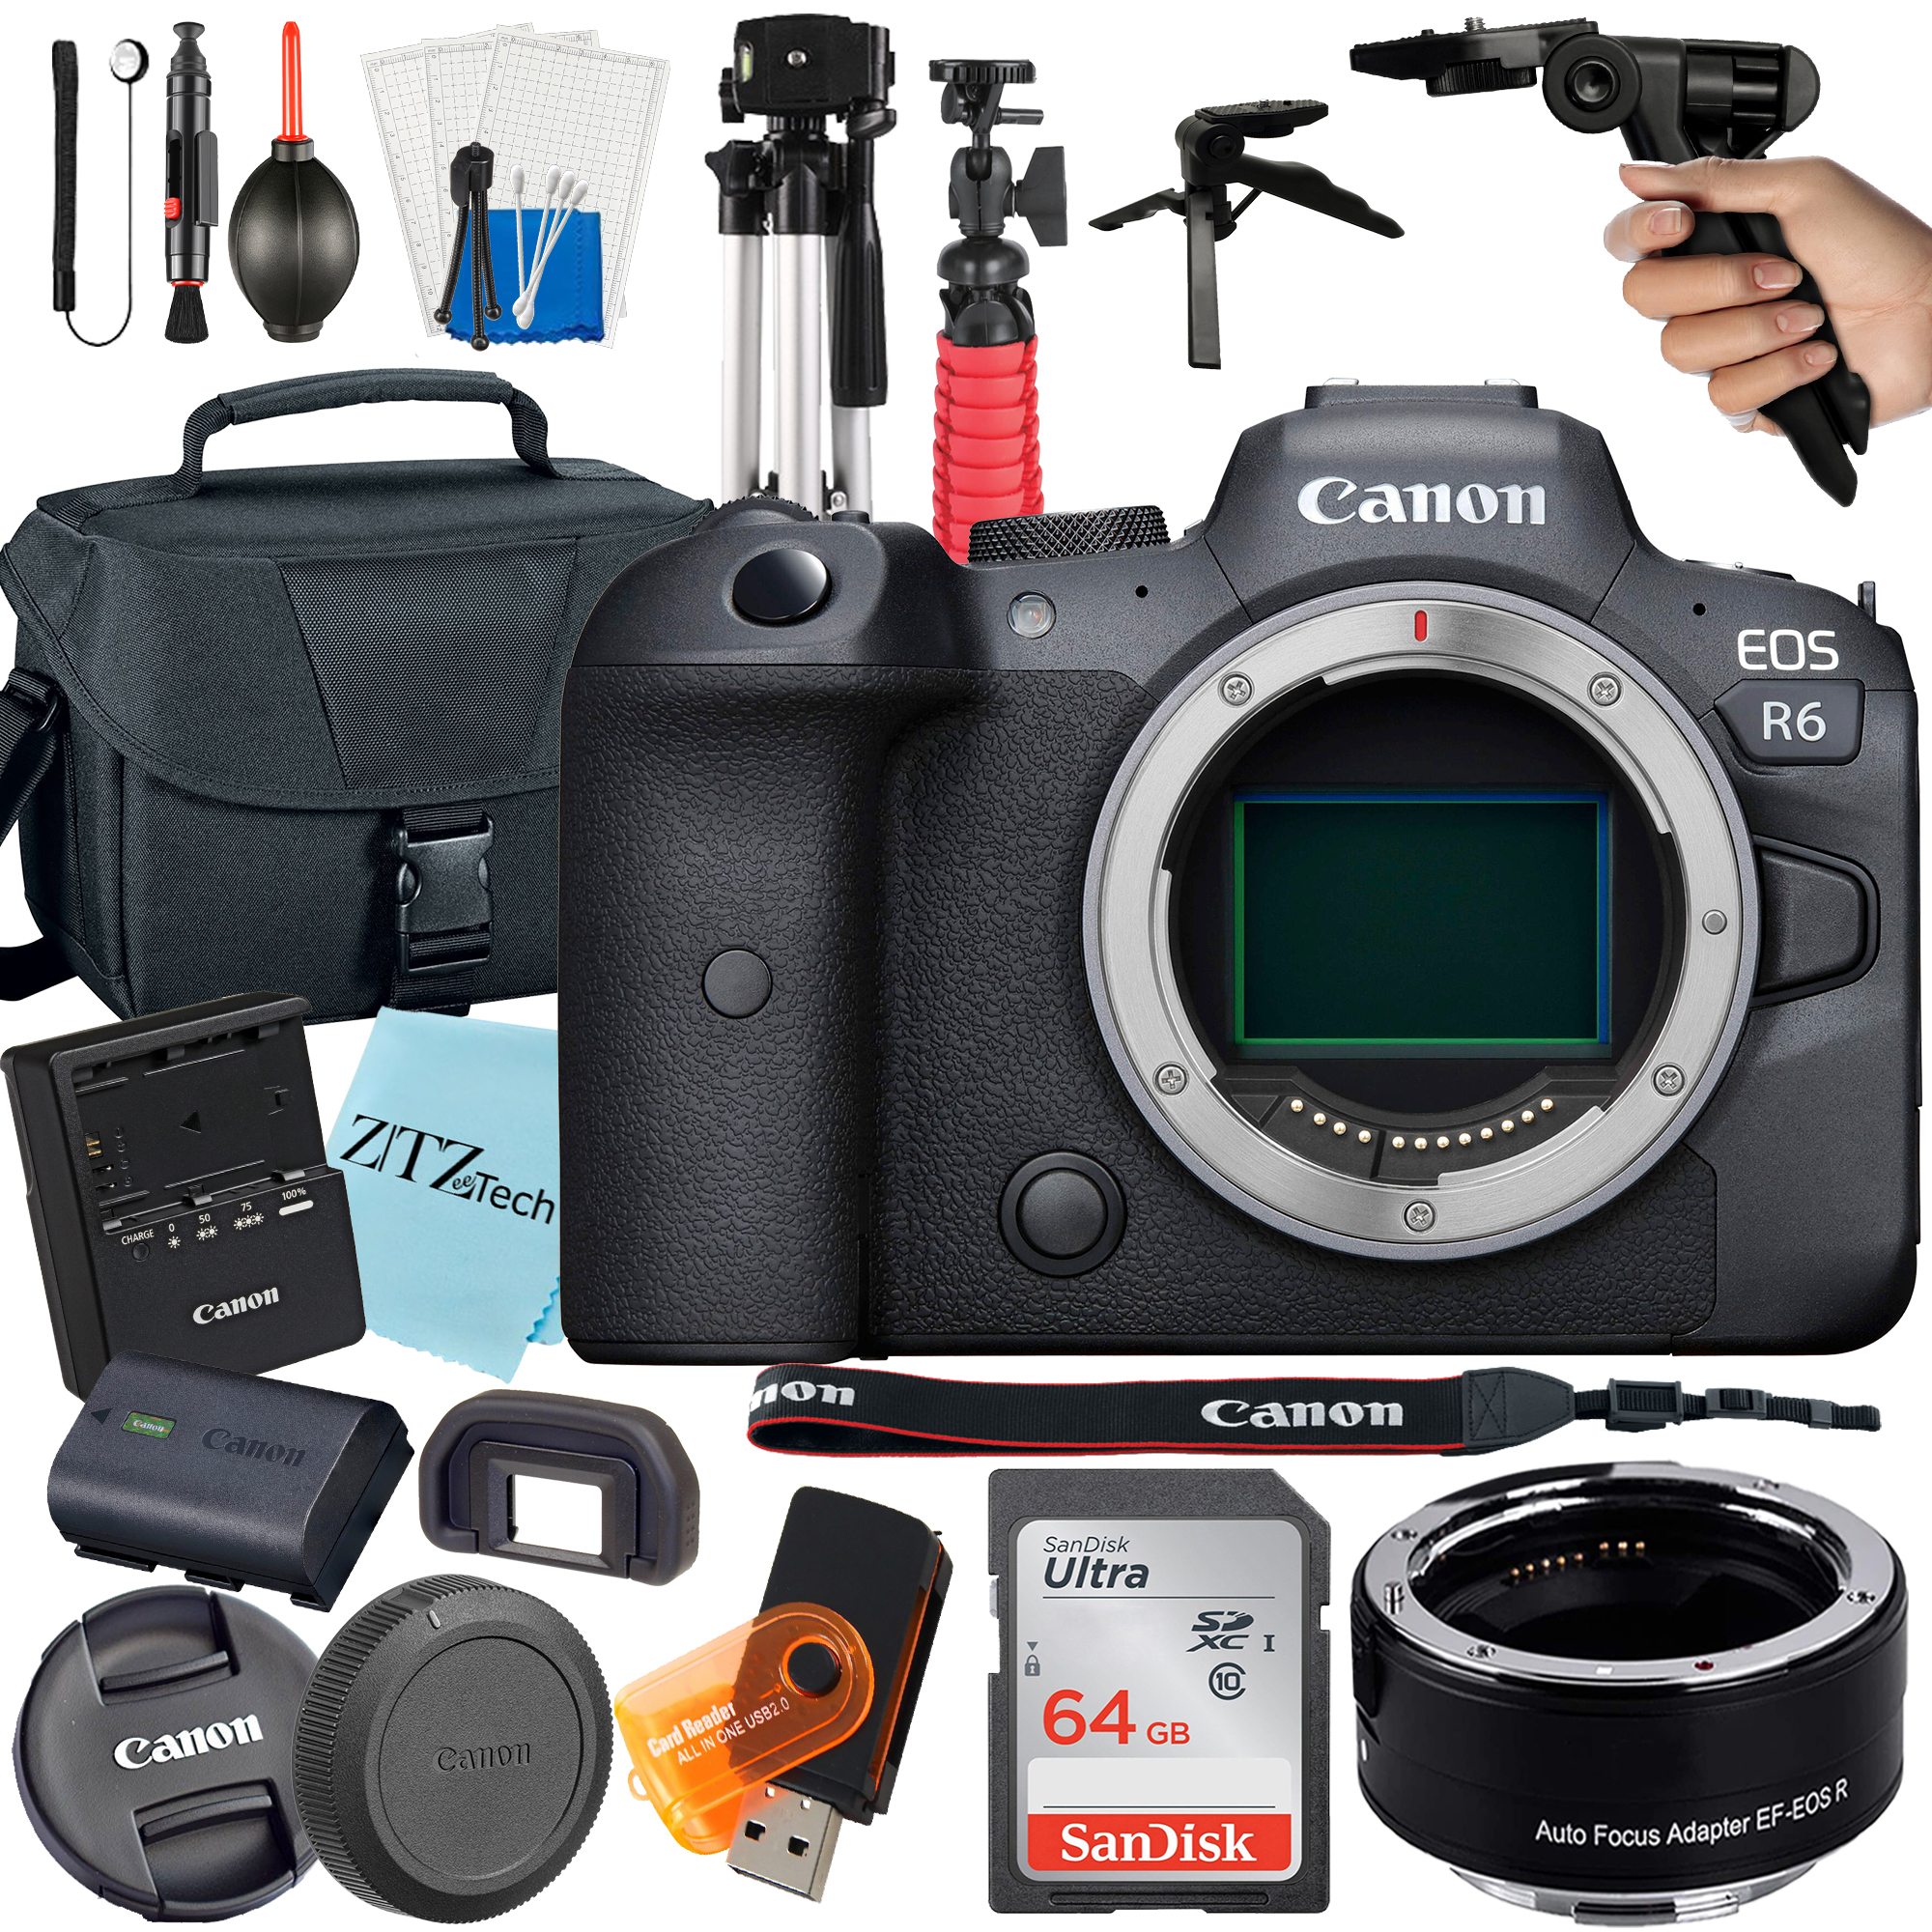 Canon EOS R6 Mirrorless Digital Camera (Body Only) with EF Mount Adapter + 64GB SanDisk + Case + ZeeTech Accessory